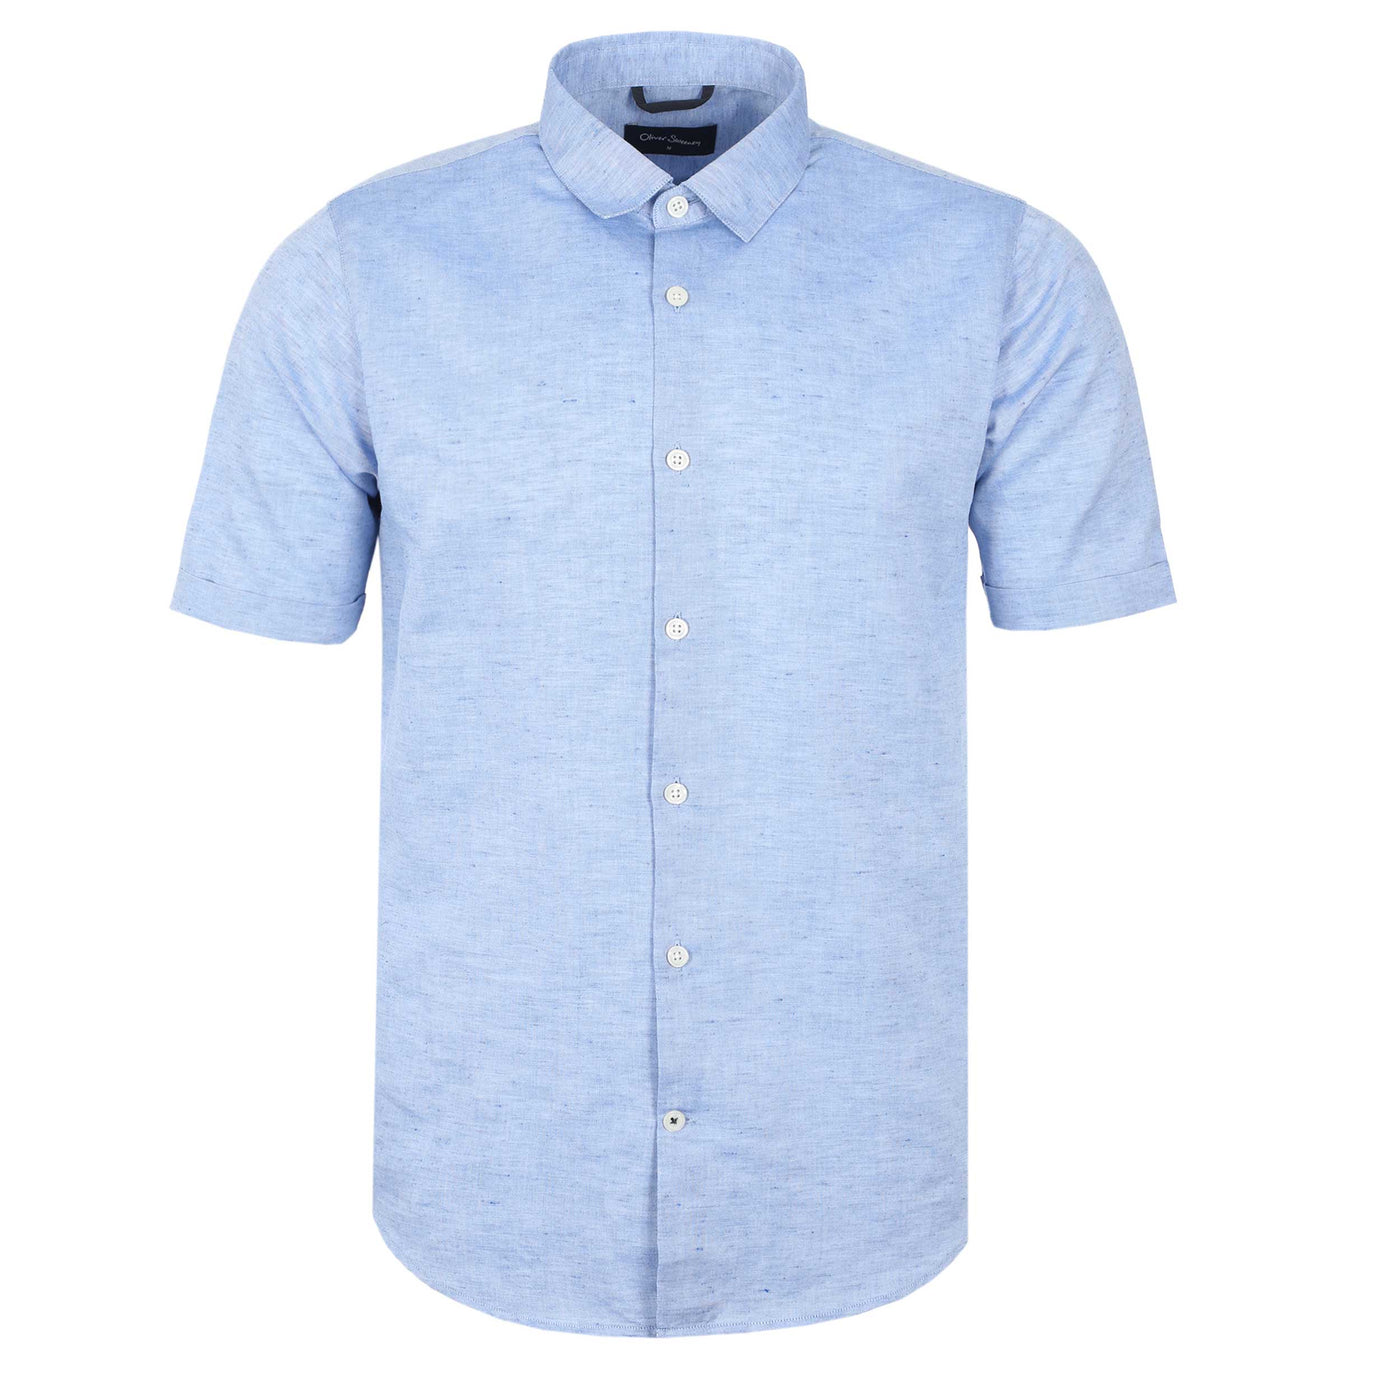 Oliver Sweeney Eakring SS Shirt in Sky Blue Front